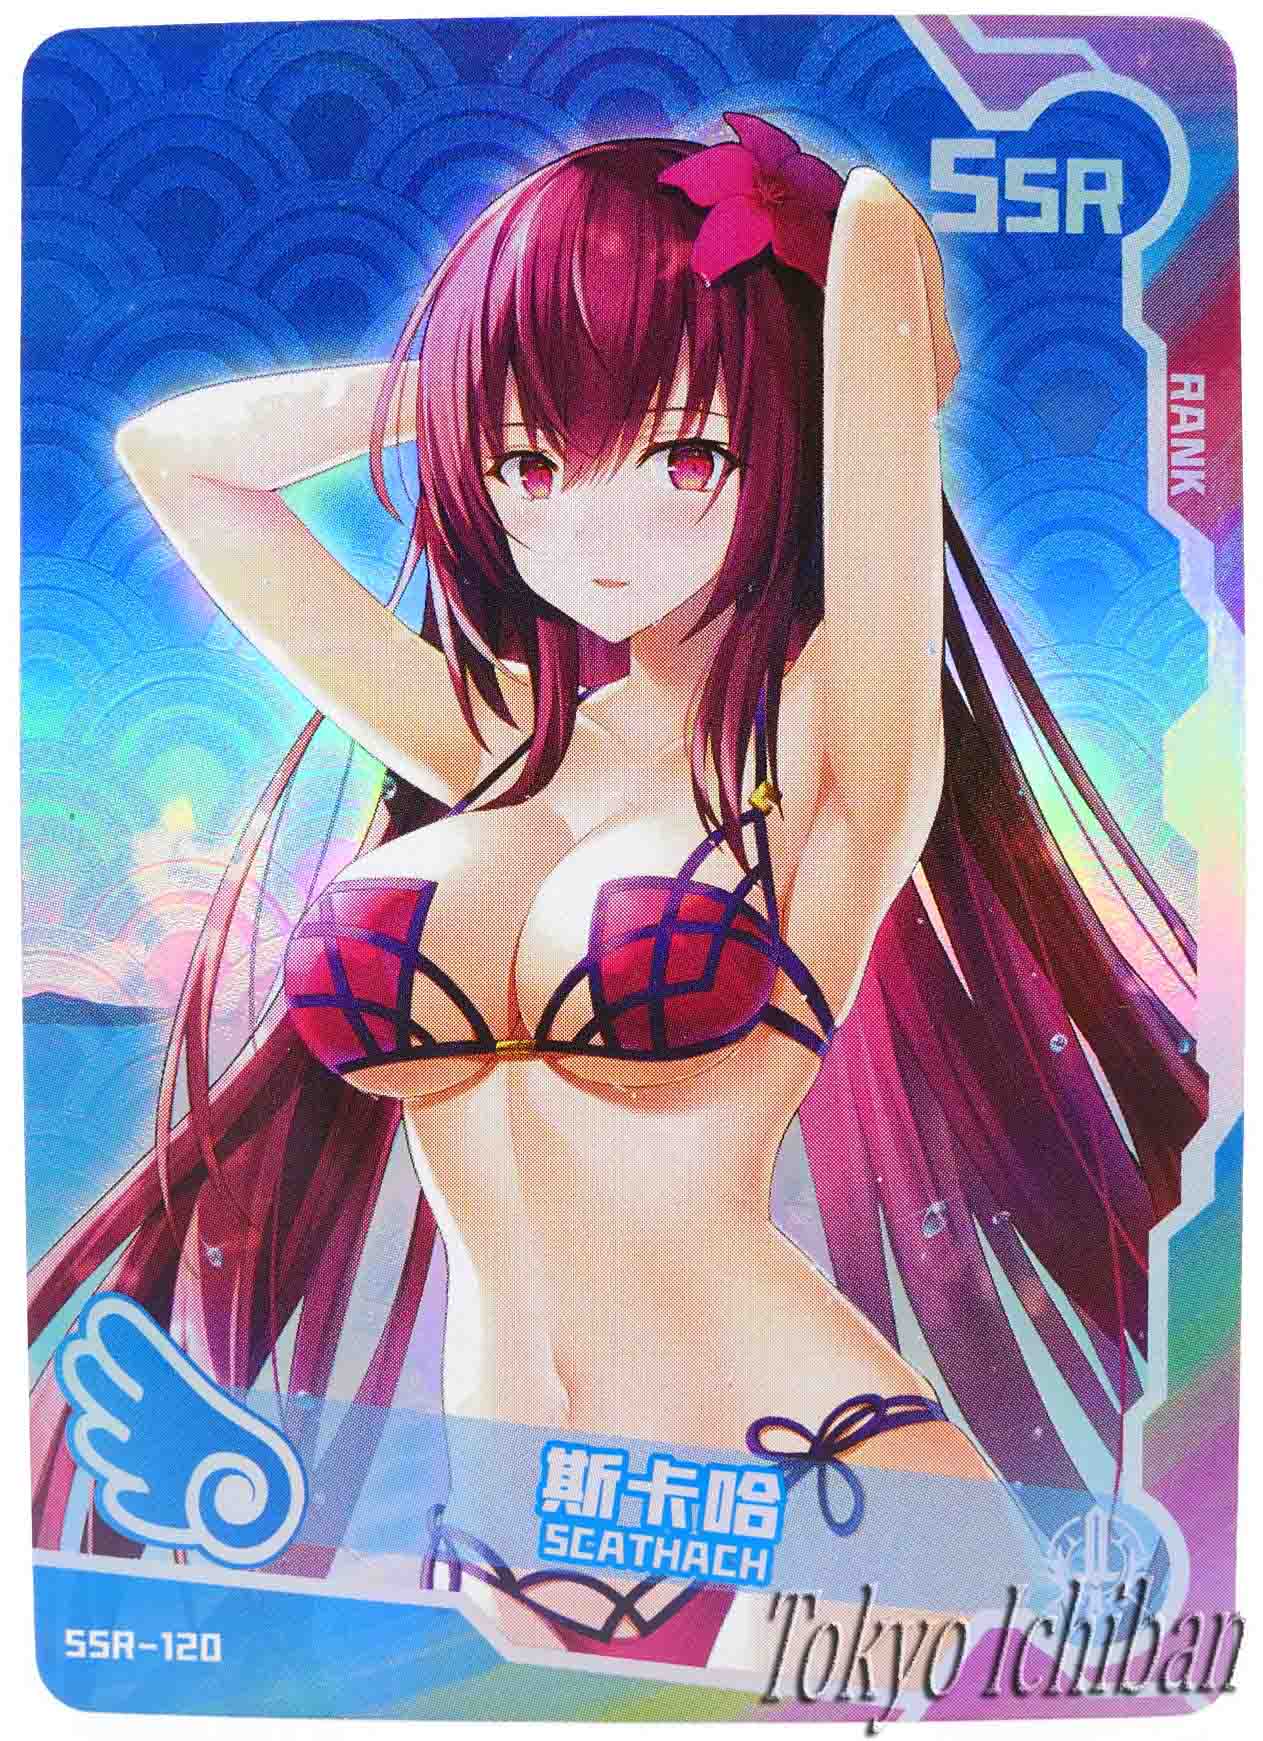 Doujin Card Fate Grand Order FGO Lancer Scathach SSR-120